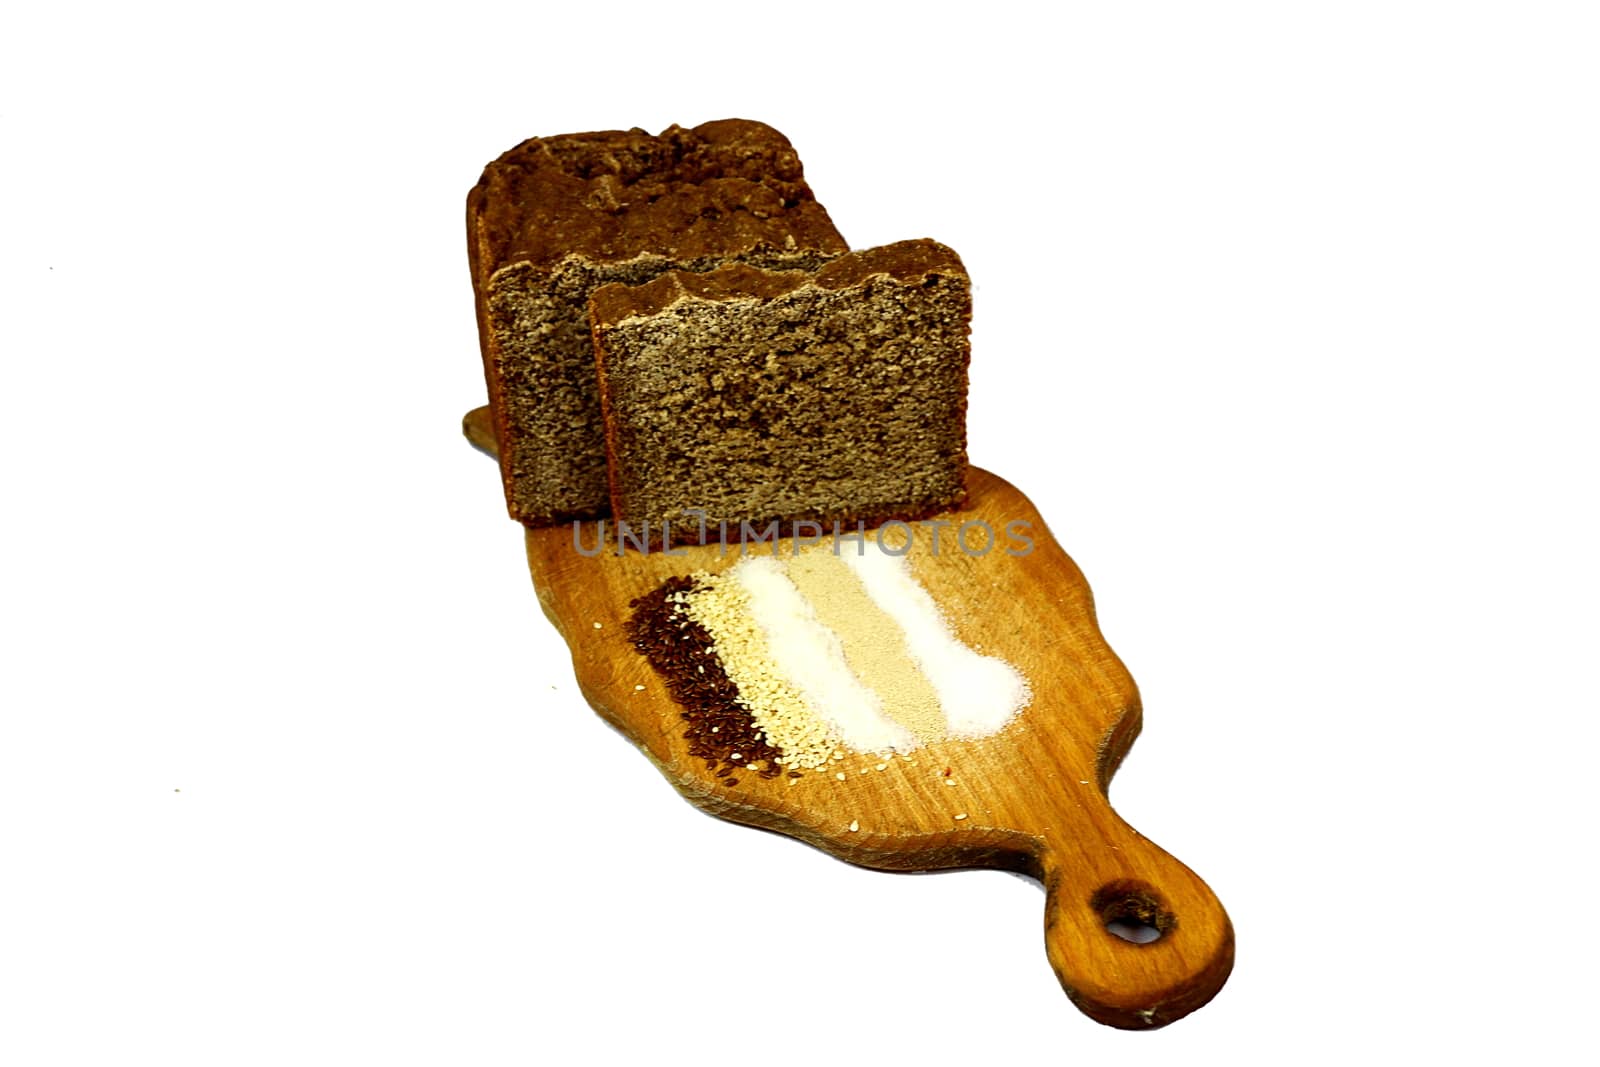 Tablet on a white background, brown bread, salt, sugar, sesame seeds, yeast and flax seeds